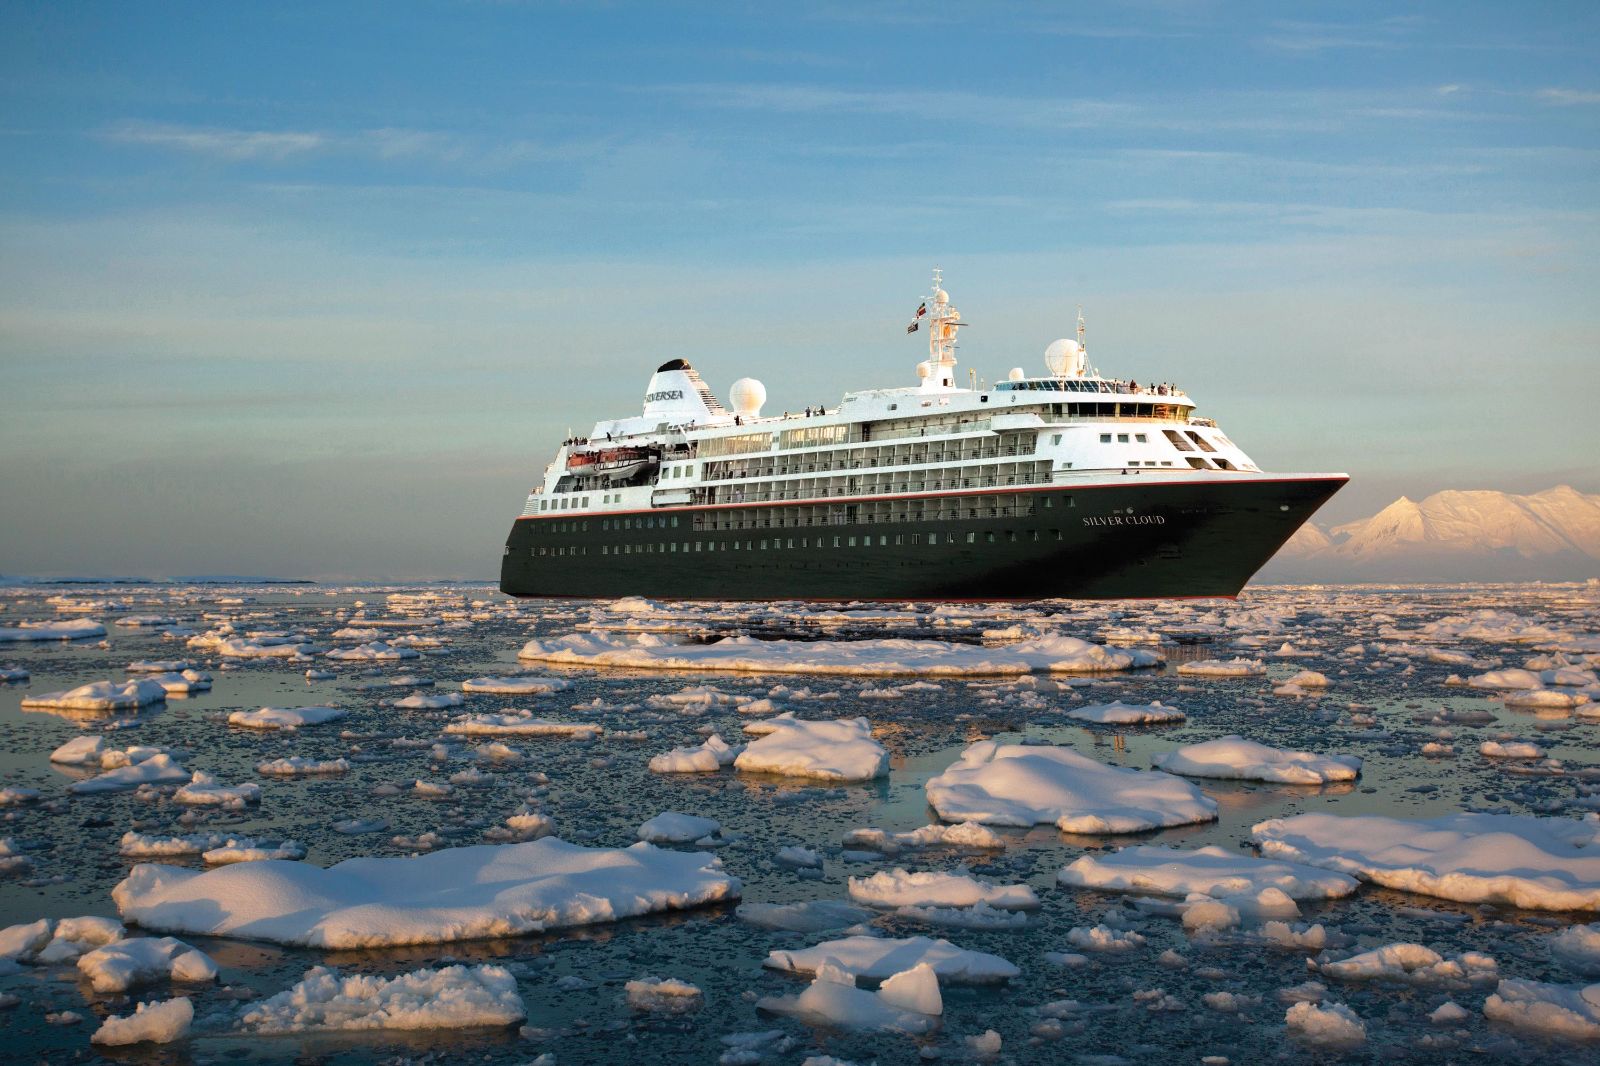 Exterior view of Silversea's Silver Cloud cruise ship in the Arctic